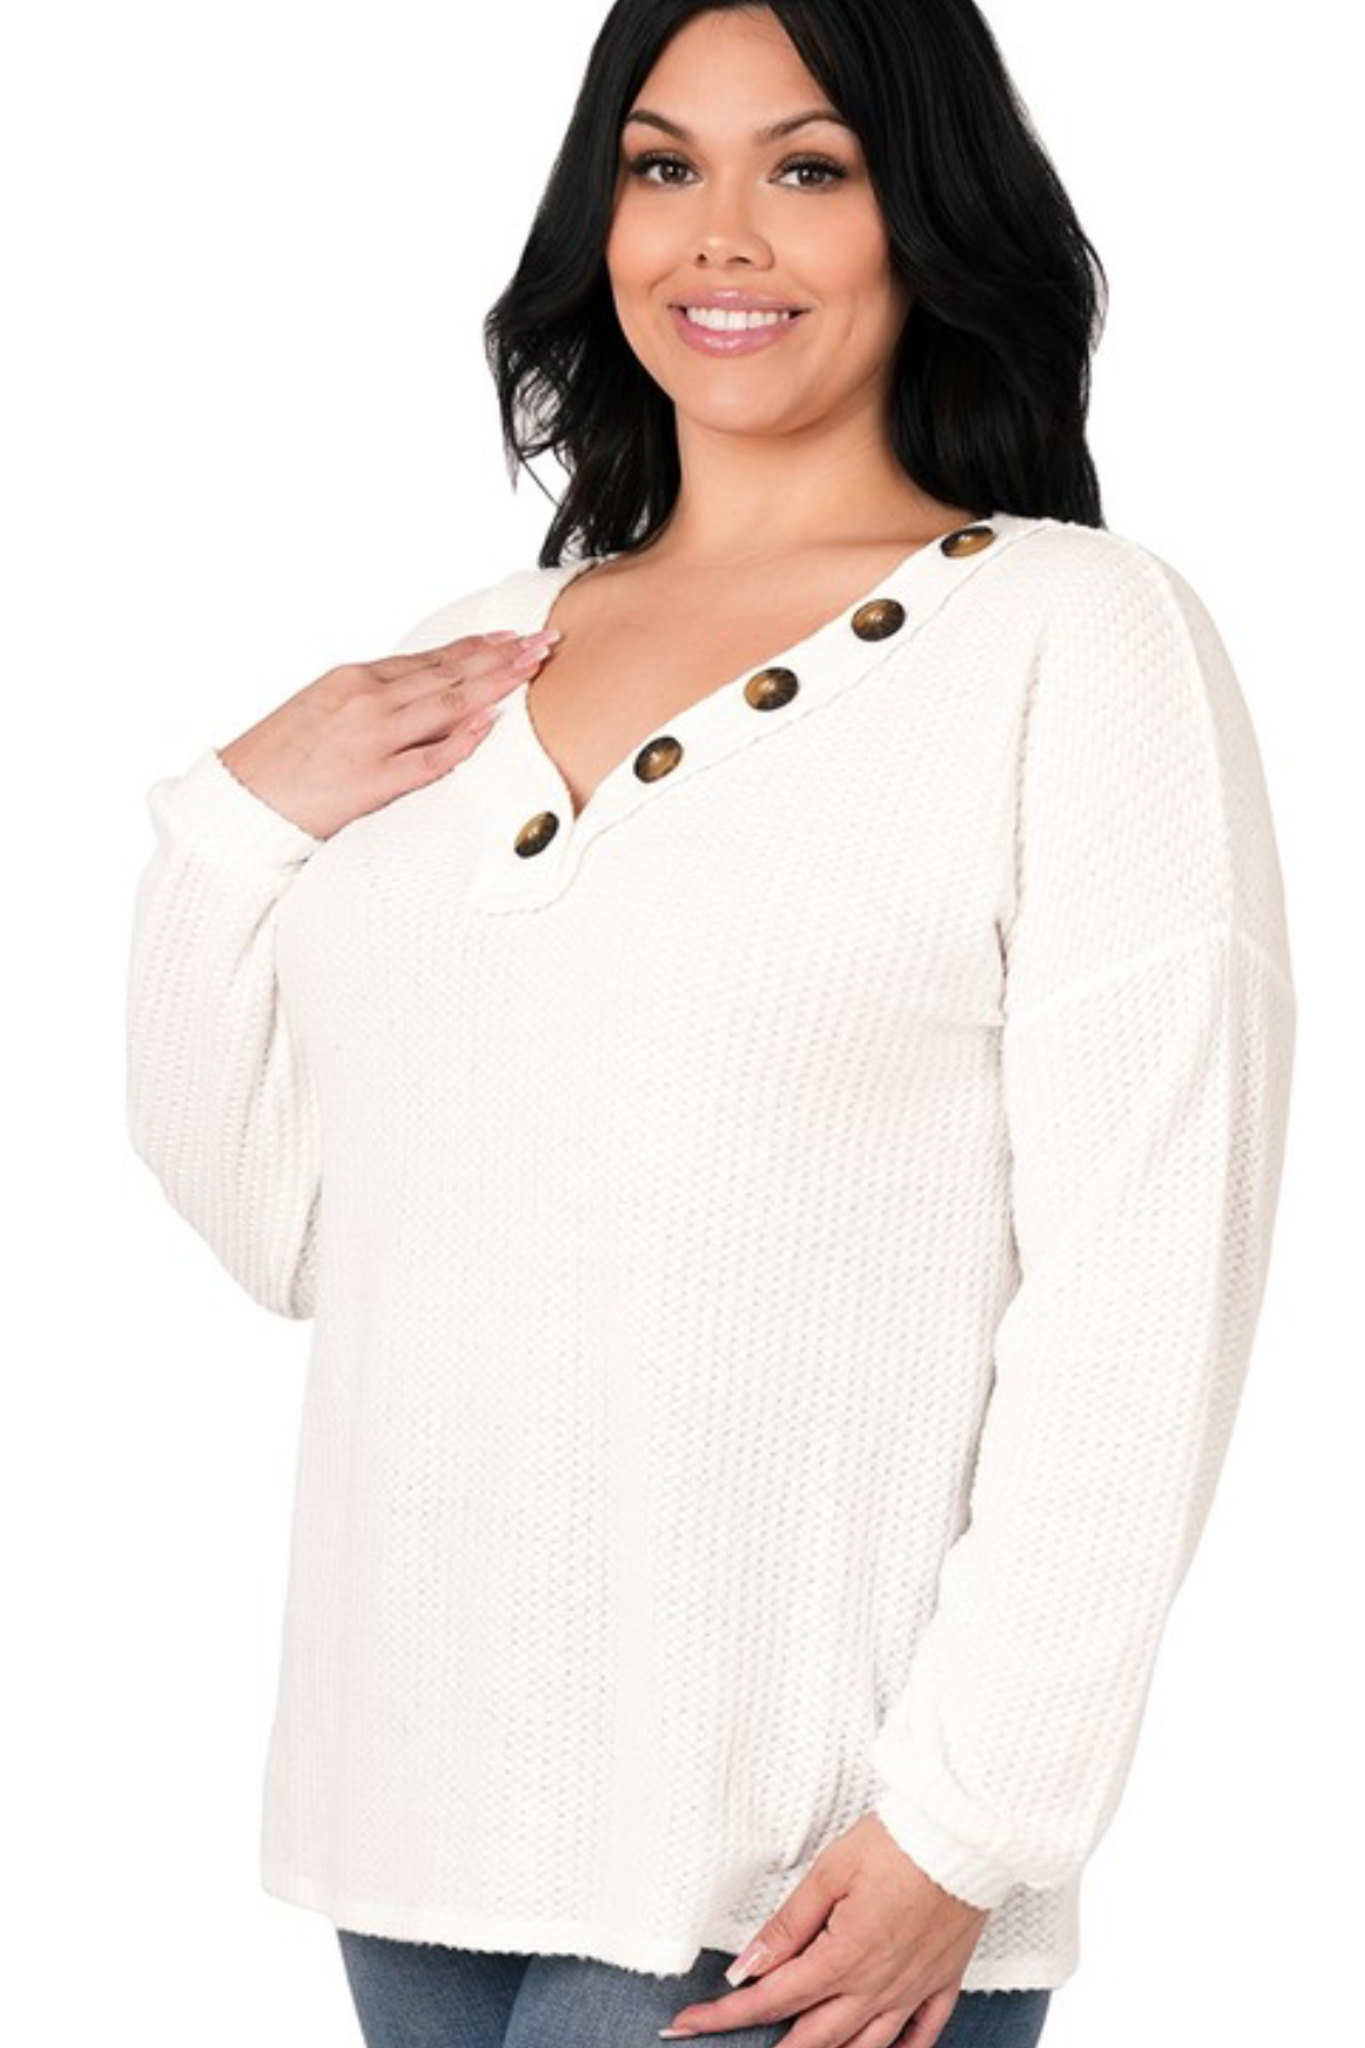 Our Half of My Heart Sweater Top is the perfect light weight sweater to have for any transitional season. The neutral color, makes this top easy to style with anything. The options are truly endless with our Half of My Heart Long Sleeve Waffle Knit Sweater Top!